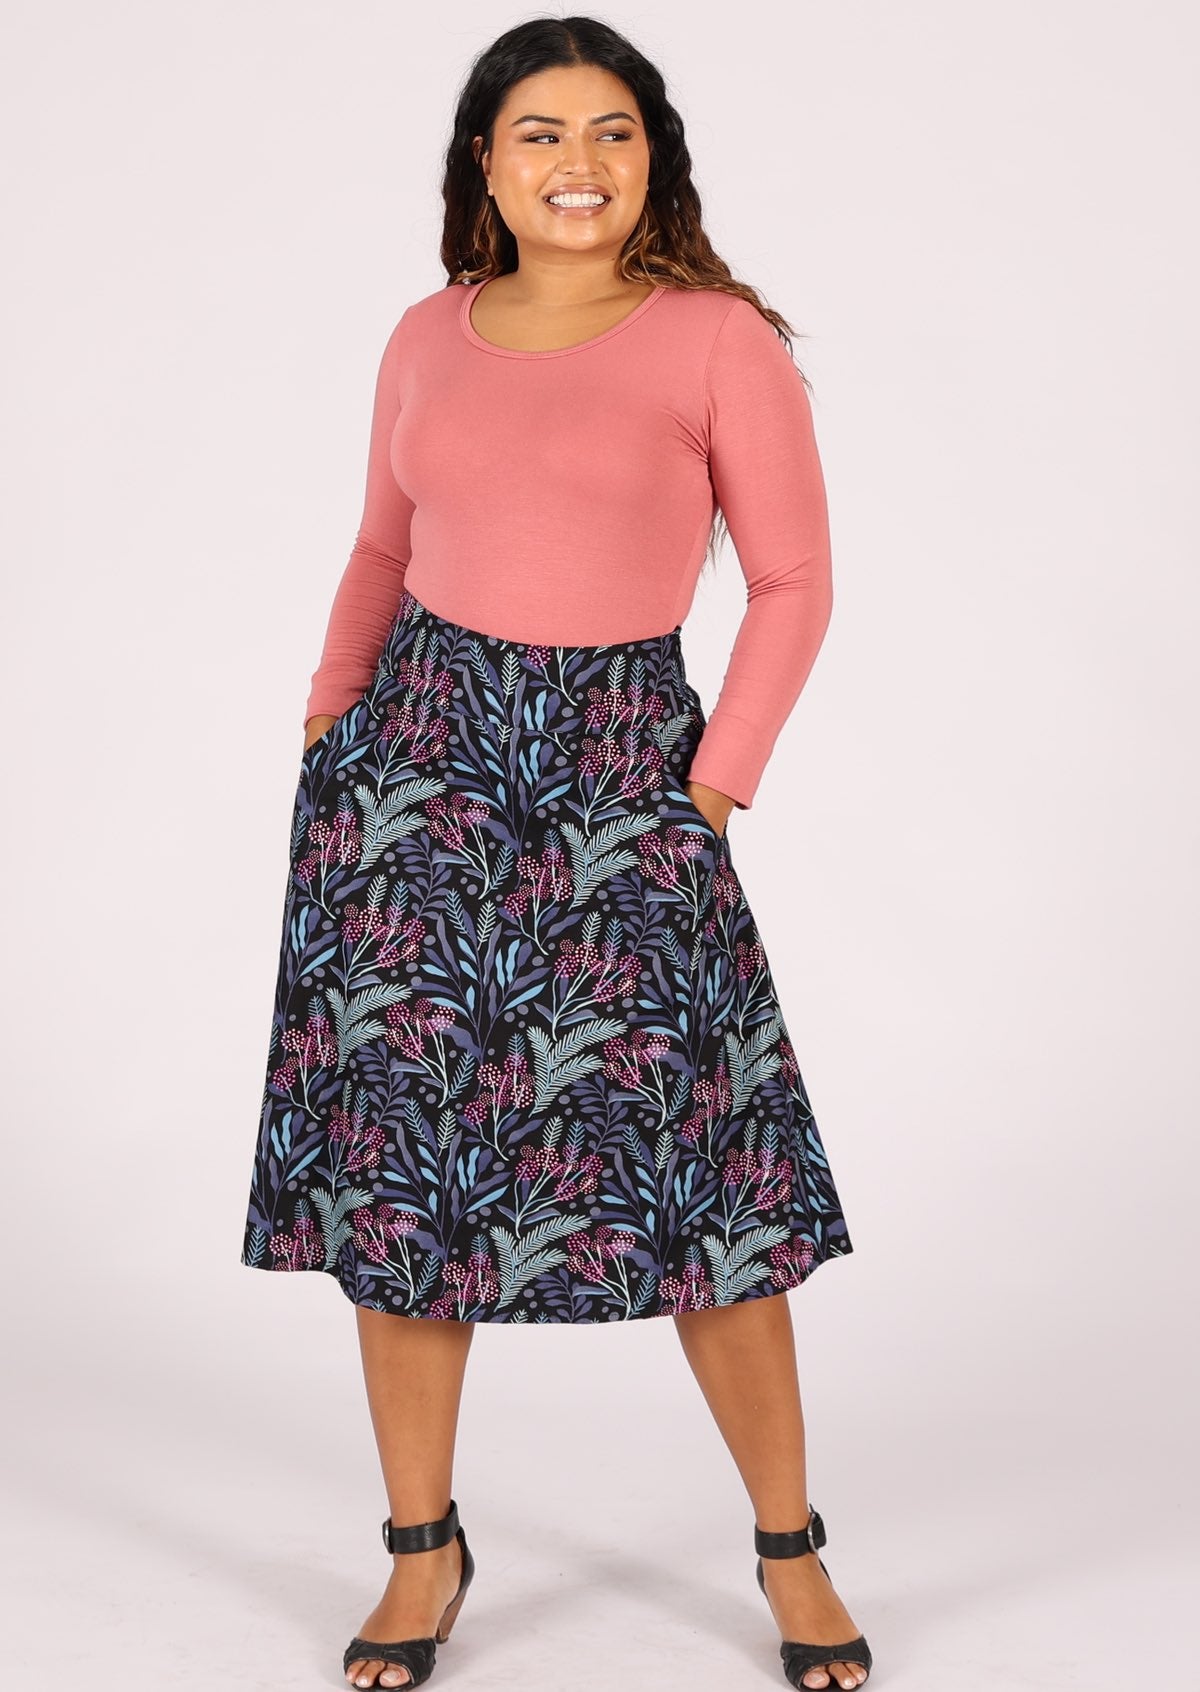 A-line cotton skirt with pockets and side zip